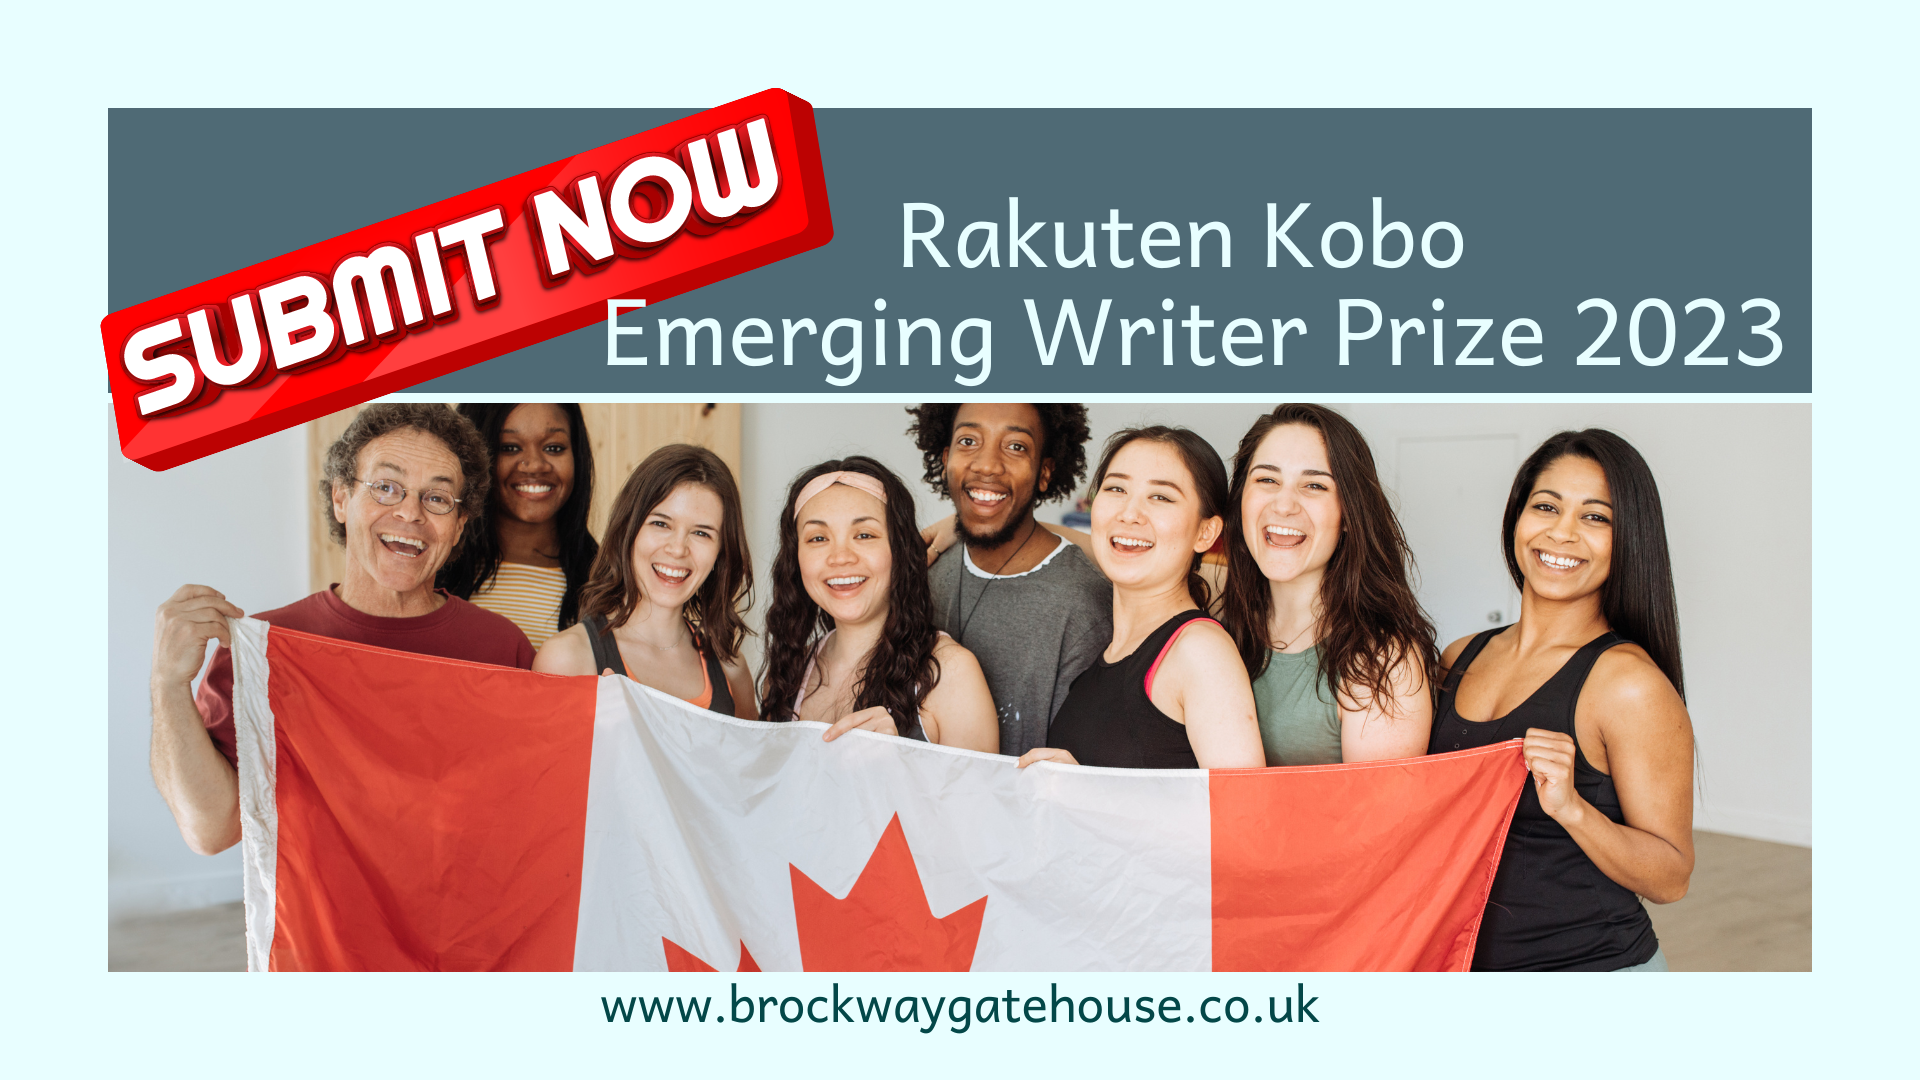 Emerging Writer Prize (2023) Open for Submissions